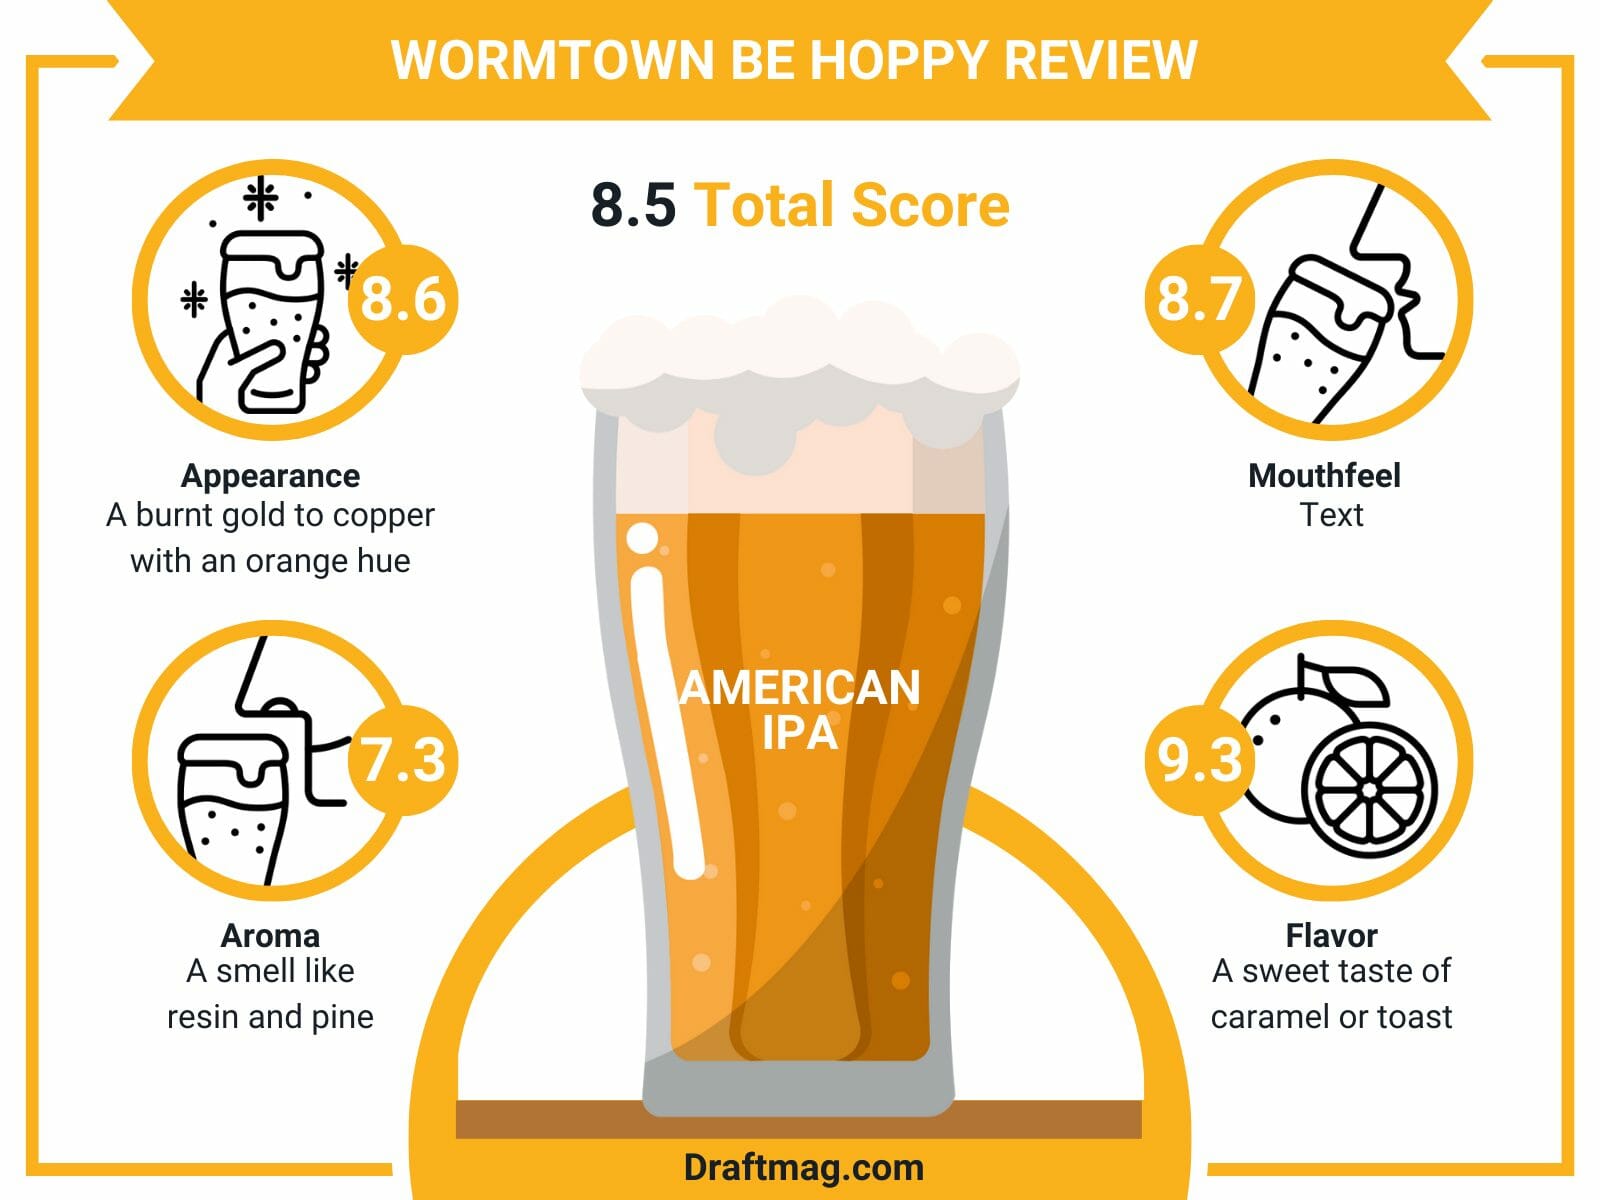 Wormtown Be Hoppy Review Infographic